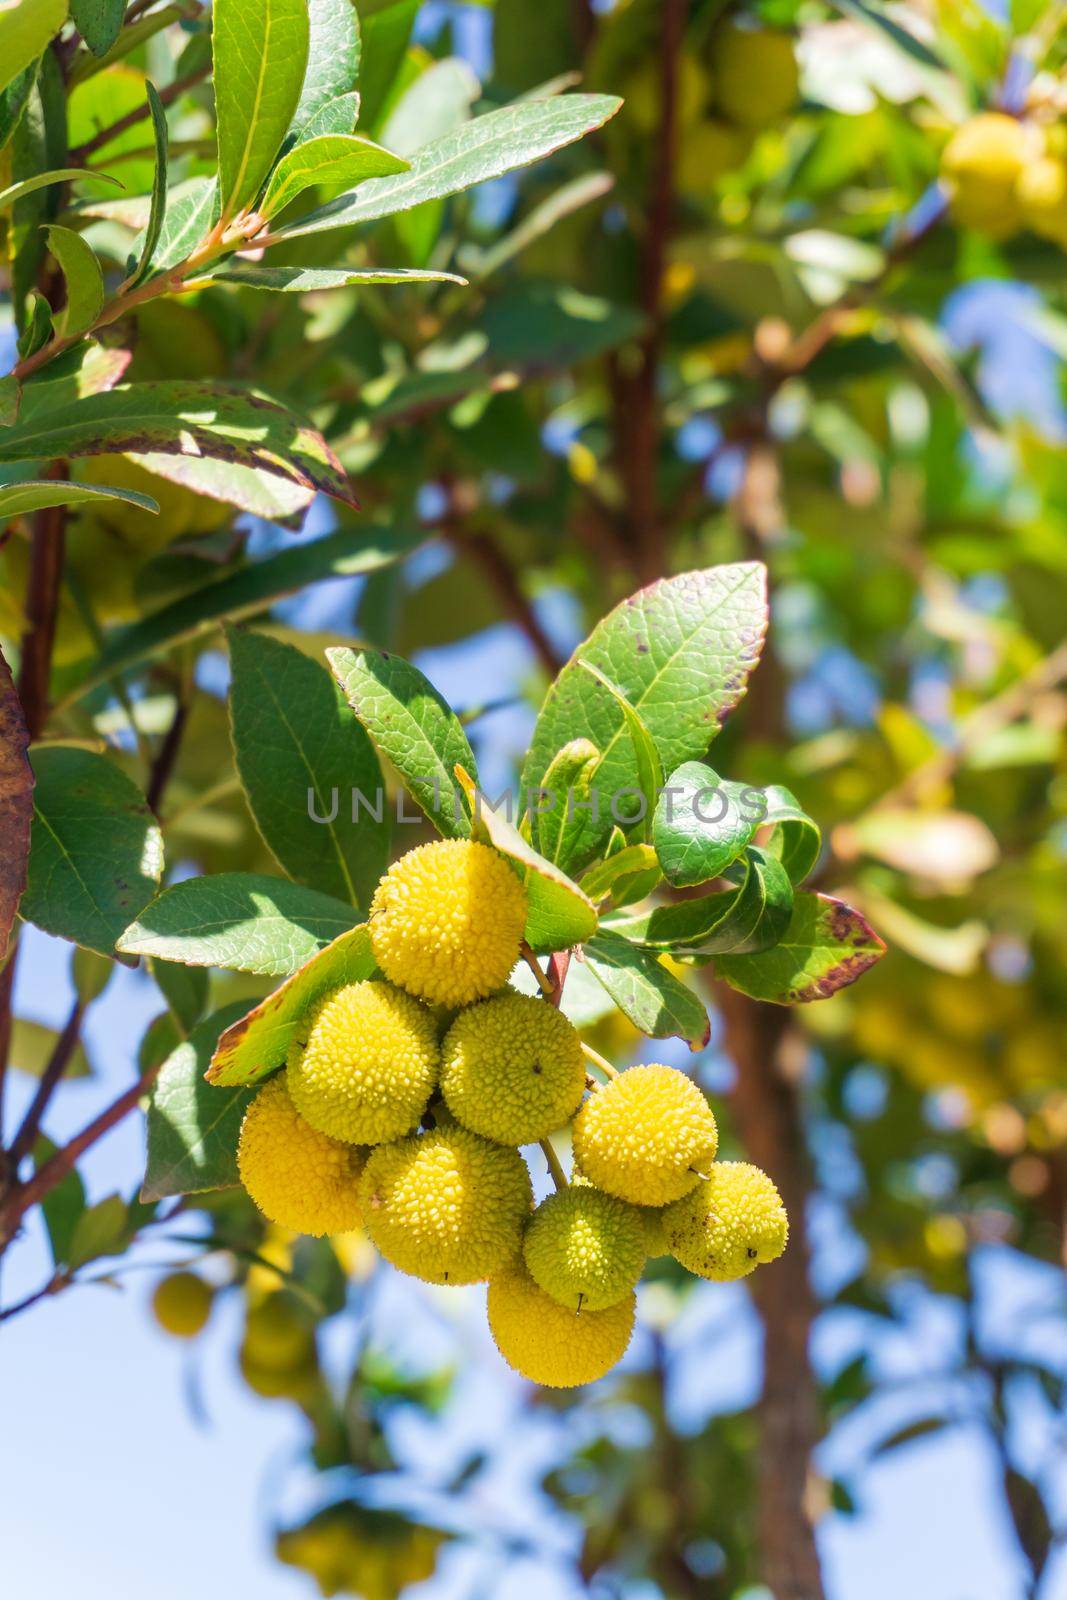 Yellow thorny Arbutus fruits ripen on a branch in an orchard close up